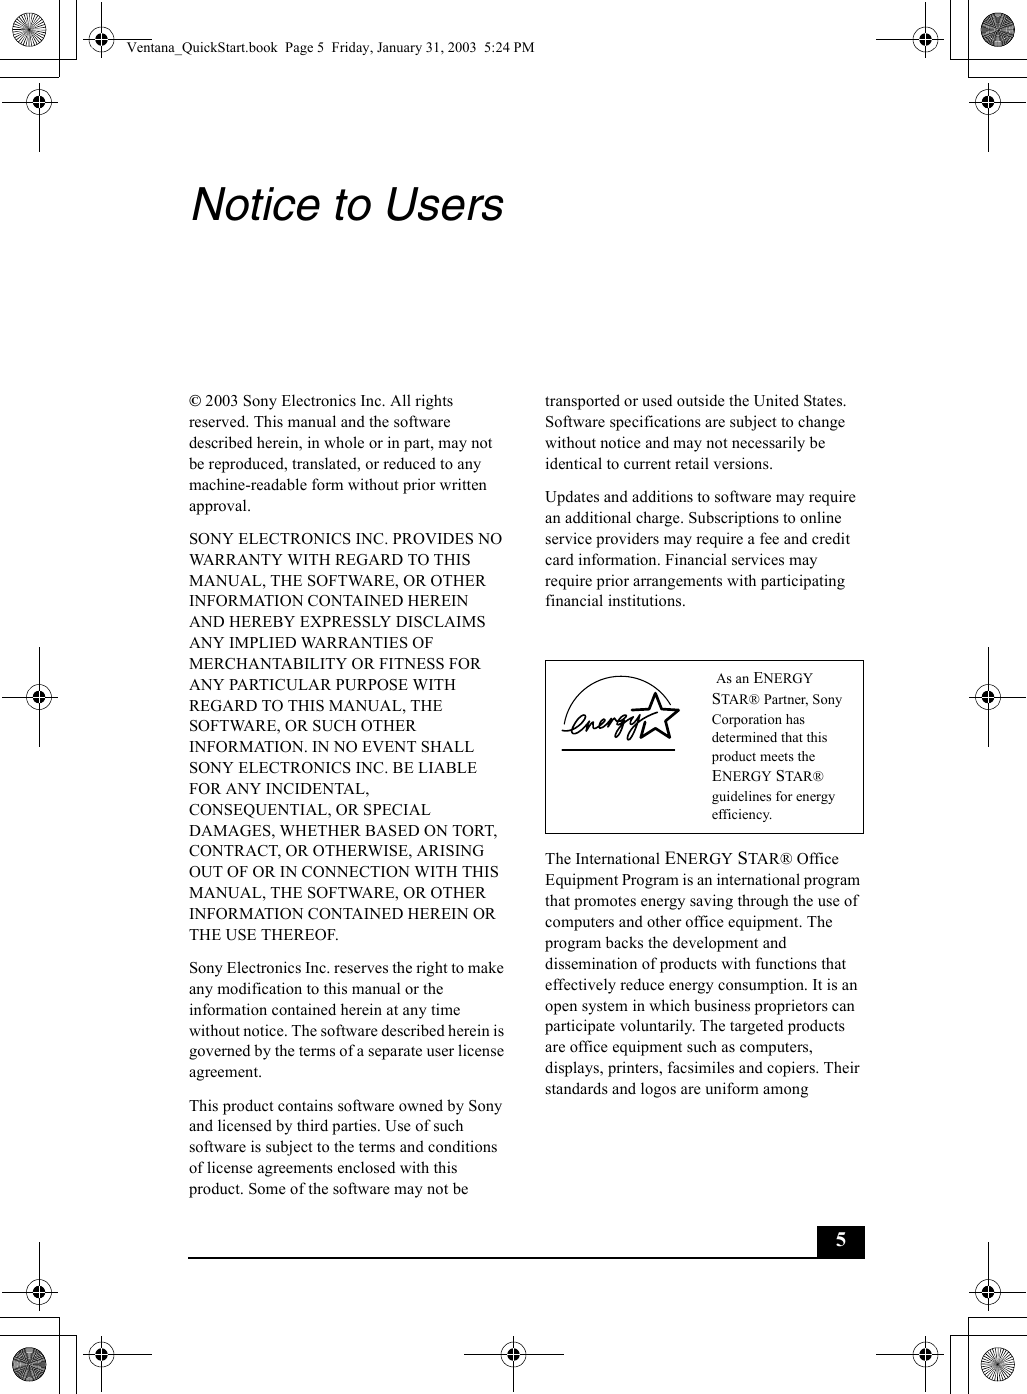 5Notice to Users© 2003 Sony Electronics Inc. All rights reserved. This manual and the software described herein, in whole or in part, may not be reproduced, translated, or reduced to any machine-readable form without prior written approval.SONY ELECTRONICS INC. PROVIDES NO WARRANTY WITH REGARD TO THIS MANUAL, THE SOFTWARE, OR OTHER INFORMATION CONTAINED HEREIN AND HEREBY EXPRESSLY DISCLAIMS ANY IMPLIED WARRANTIES OF MERCHANTABILITY OR FITNESS FOR ANY PARTICULAR PURPOSE WITH REGARD TO THIS MANUAL, THE SOFTWARE, OR SUCH OTHER INFORMATION. IN NO EVENT SHALL SONY ELECTRONICS INC. BE LIABLE FOR ANY INCIDENTAL, CONSEQUENTIAL, OR SPECIAL DAMAGES, WHETHER BASED ON TORT, CONTRACT, OR OTHERWISE, ARISING OUT OF OR IN CONNECTION WITH THIS MANUAL, THE SOFTWARE, OR OTHER INFORMATION CONTAINED HEREIN OR THE USE THEREOF.Sony Electronics Inc. reserves the right to make any modification to this manual or the information contained herein at any time without notice. The software described herein is governed by the terms of a separate user license agreement.This product contains software owned by Sony and licensed by third parties. Use of such software is subject to the terms and conditions of license agreements enclosed with this product. Some of the software may not be transported or used outside the United States. Software specifications are subject to change without notice and may not necessarily be identical to current retail versions.Updates and additions to software may require an additional charge. Subscriptions to online service providers may require a fee and credit card information. Financial services may require prior arrangements with participating financial institutions.The International ENERGY STAR® Office Equipment Program is an international program that promotes energy saving through the use of computers and other office equipment. The program backs the development and dissemination of products with functions that effectively reduce energy consumption. It is an open system in which business proprietors can participate voluntarily. The targeted products are office equipment such as computers, displays, printers, facsimiles and copiers. Their standards and logos are uniform among  As an ENERGY STAR® Partner, Sony Corporation has determined that this product meets the ENERGY STAR® guidelines for energy efficiency.Ventana_QuickStart.book  Page 5  Friday, January 31, 2003  5:24 PM